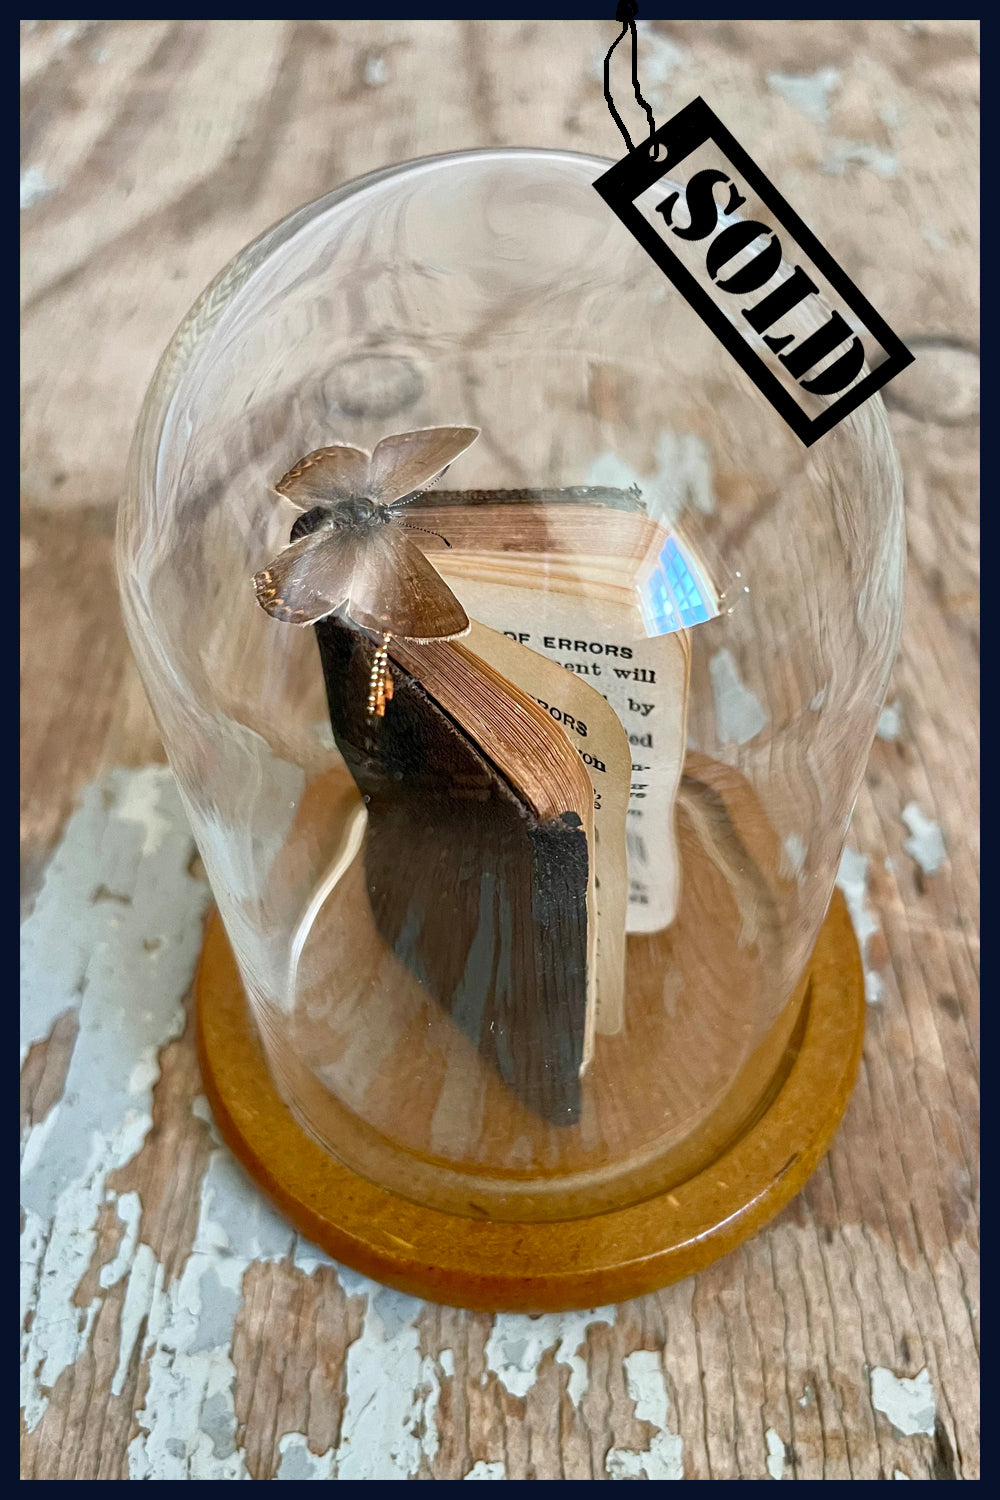 SOLD Enigma Variations Collection: Miniature Antique 'Comedy of Errors' with a Specimen Butterfly in a Glass Display Dome